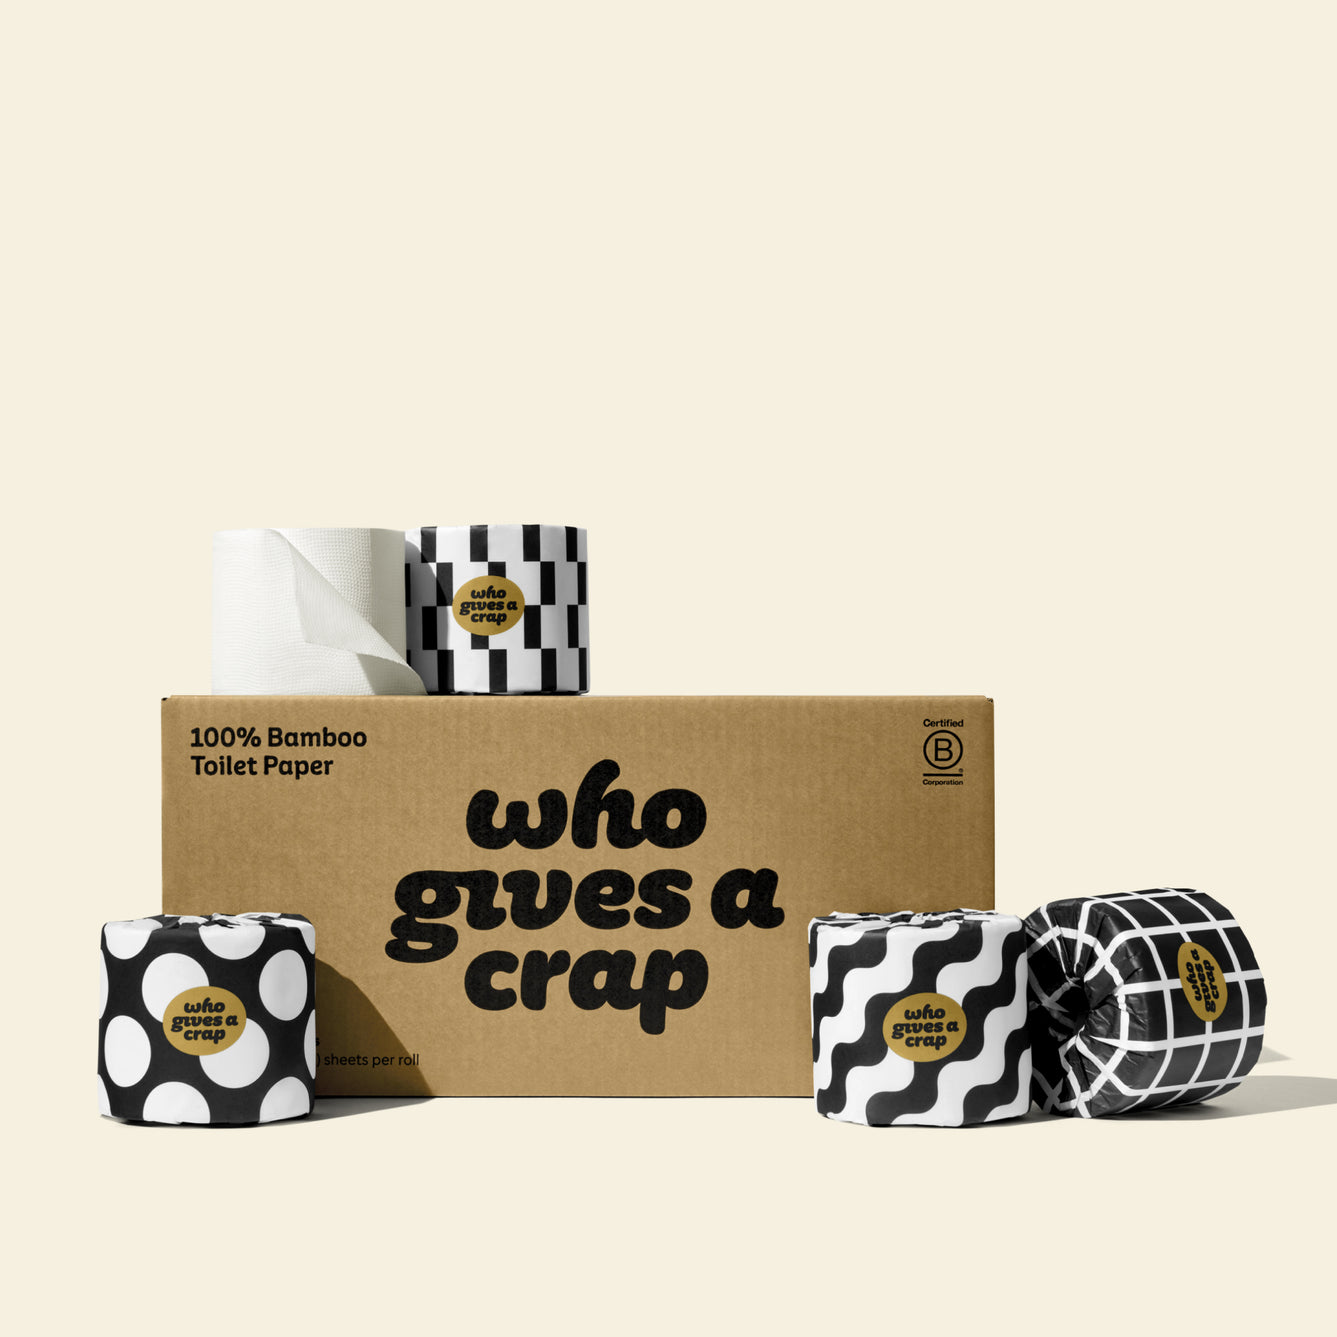 Premium Bamboo Toilet Paper - Double Length rolls in black and white wrappers - 24 Rolls